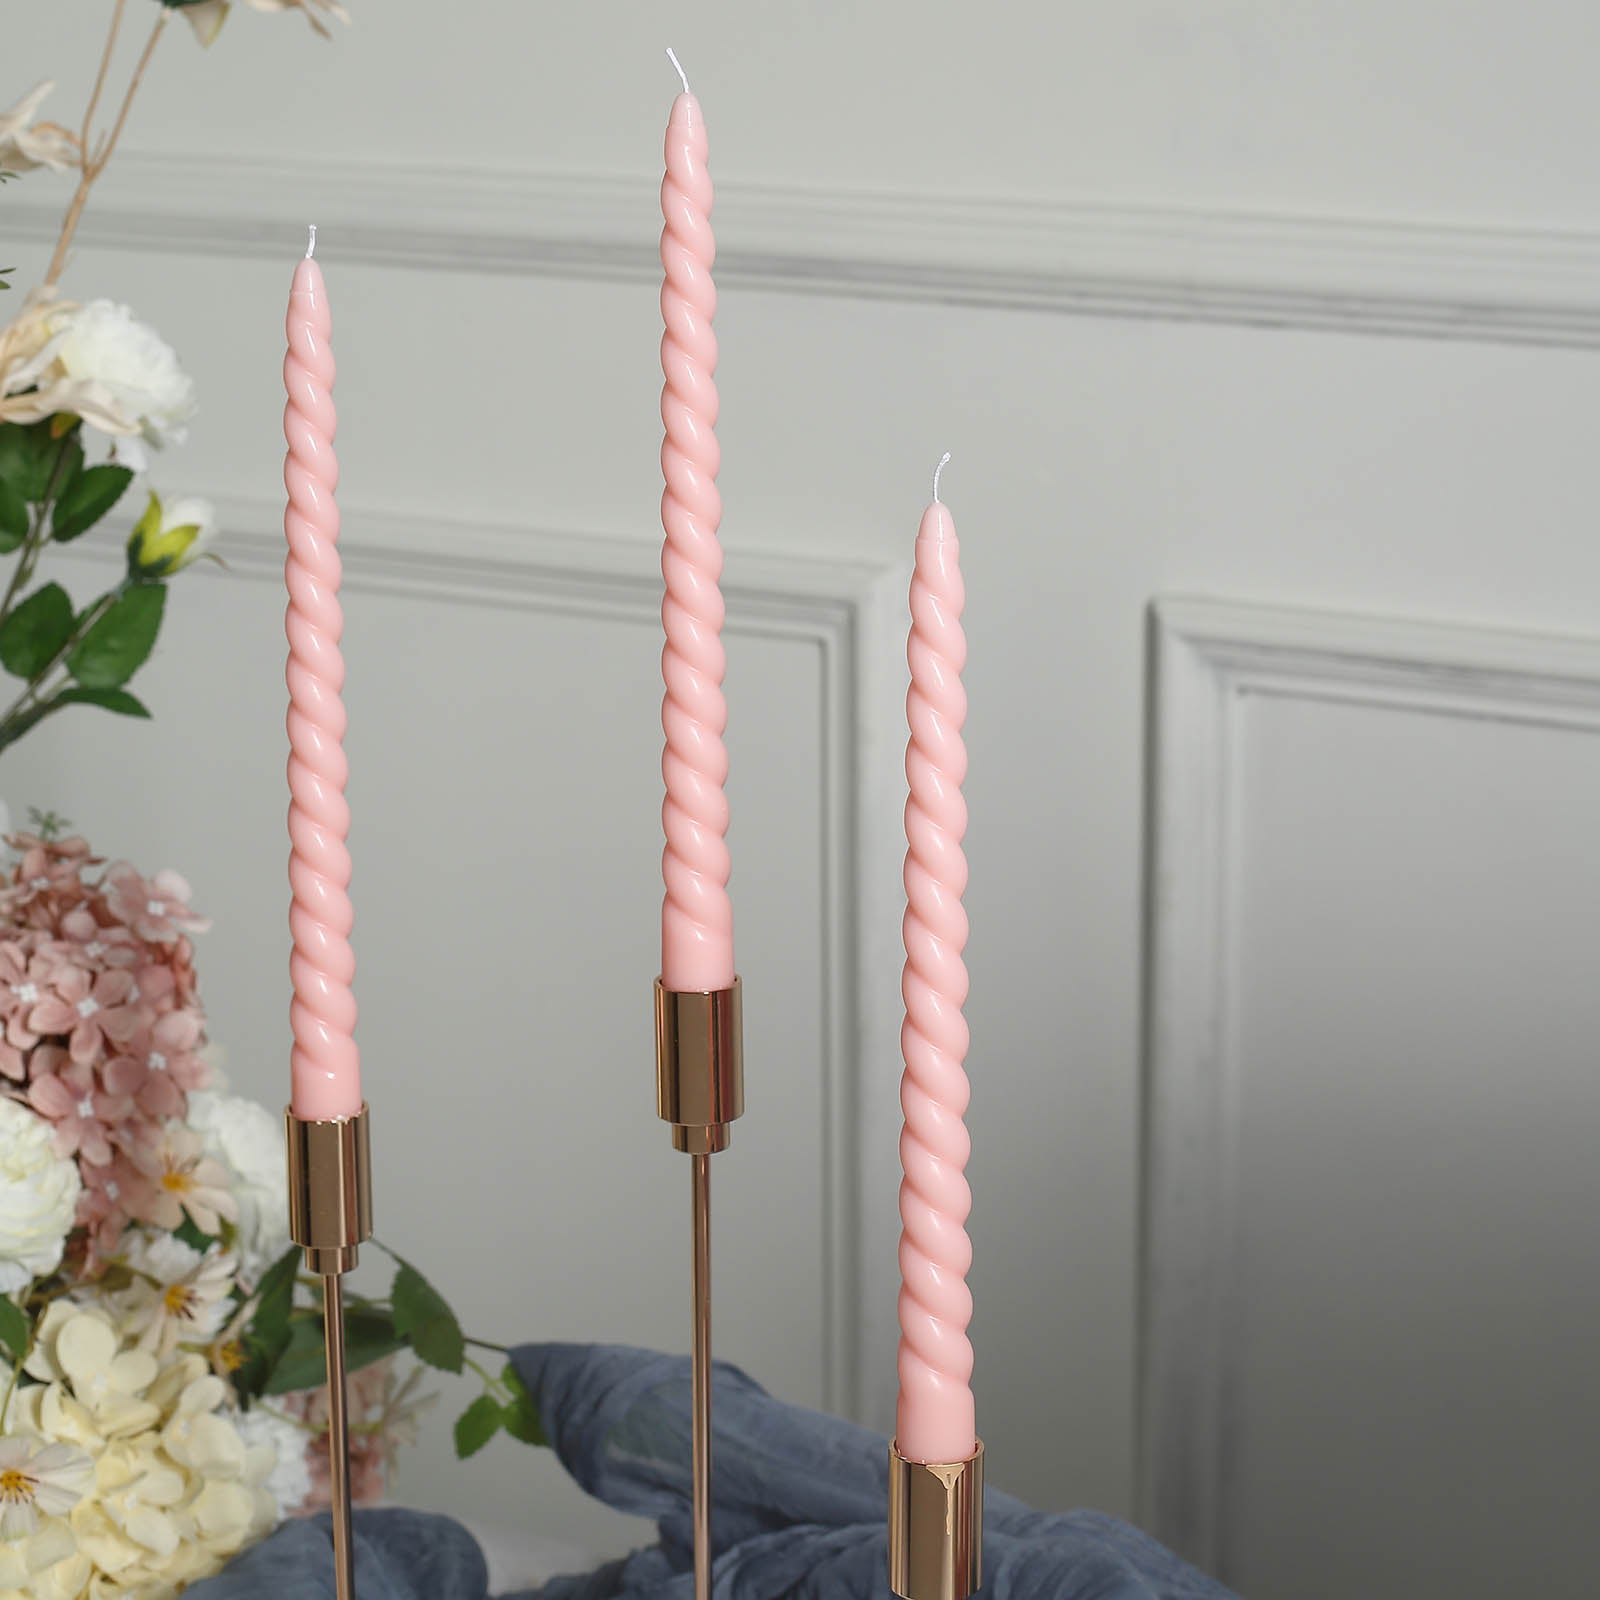 12 Spiral 11 Long Unscented Premium Wax Taper Candles Rose Gold